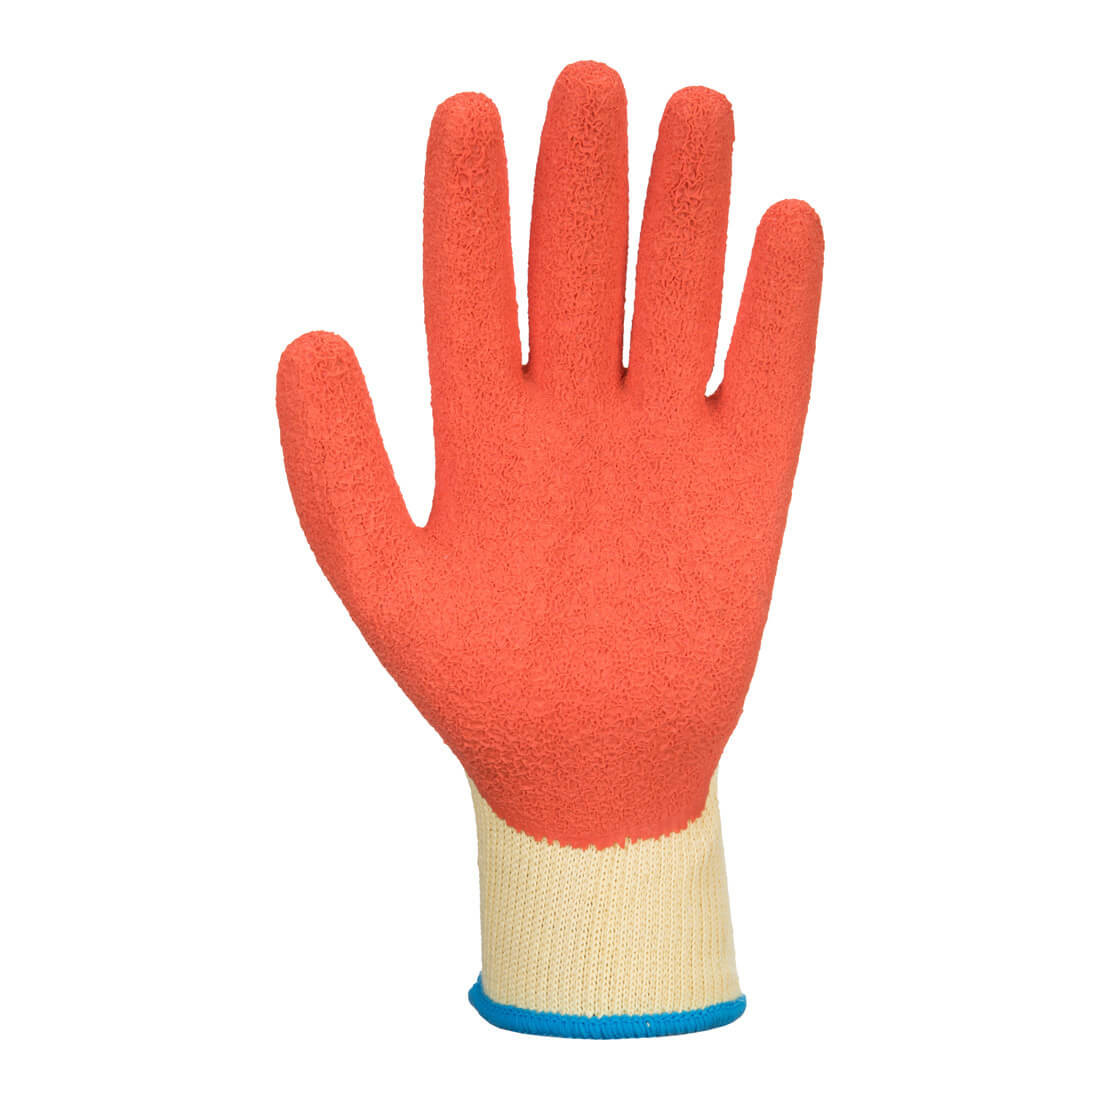 Xtra Grip Glove Latex - Personal protection